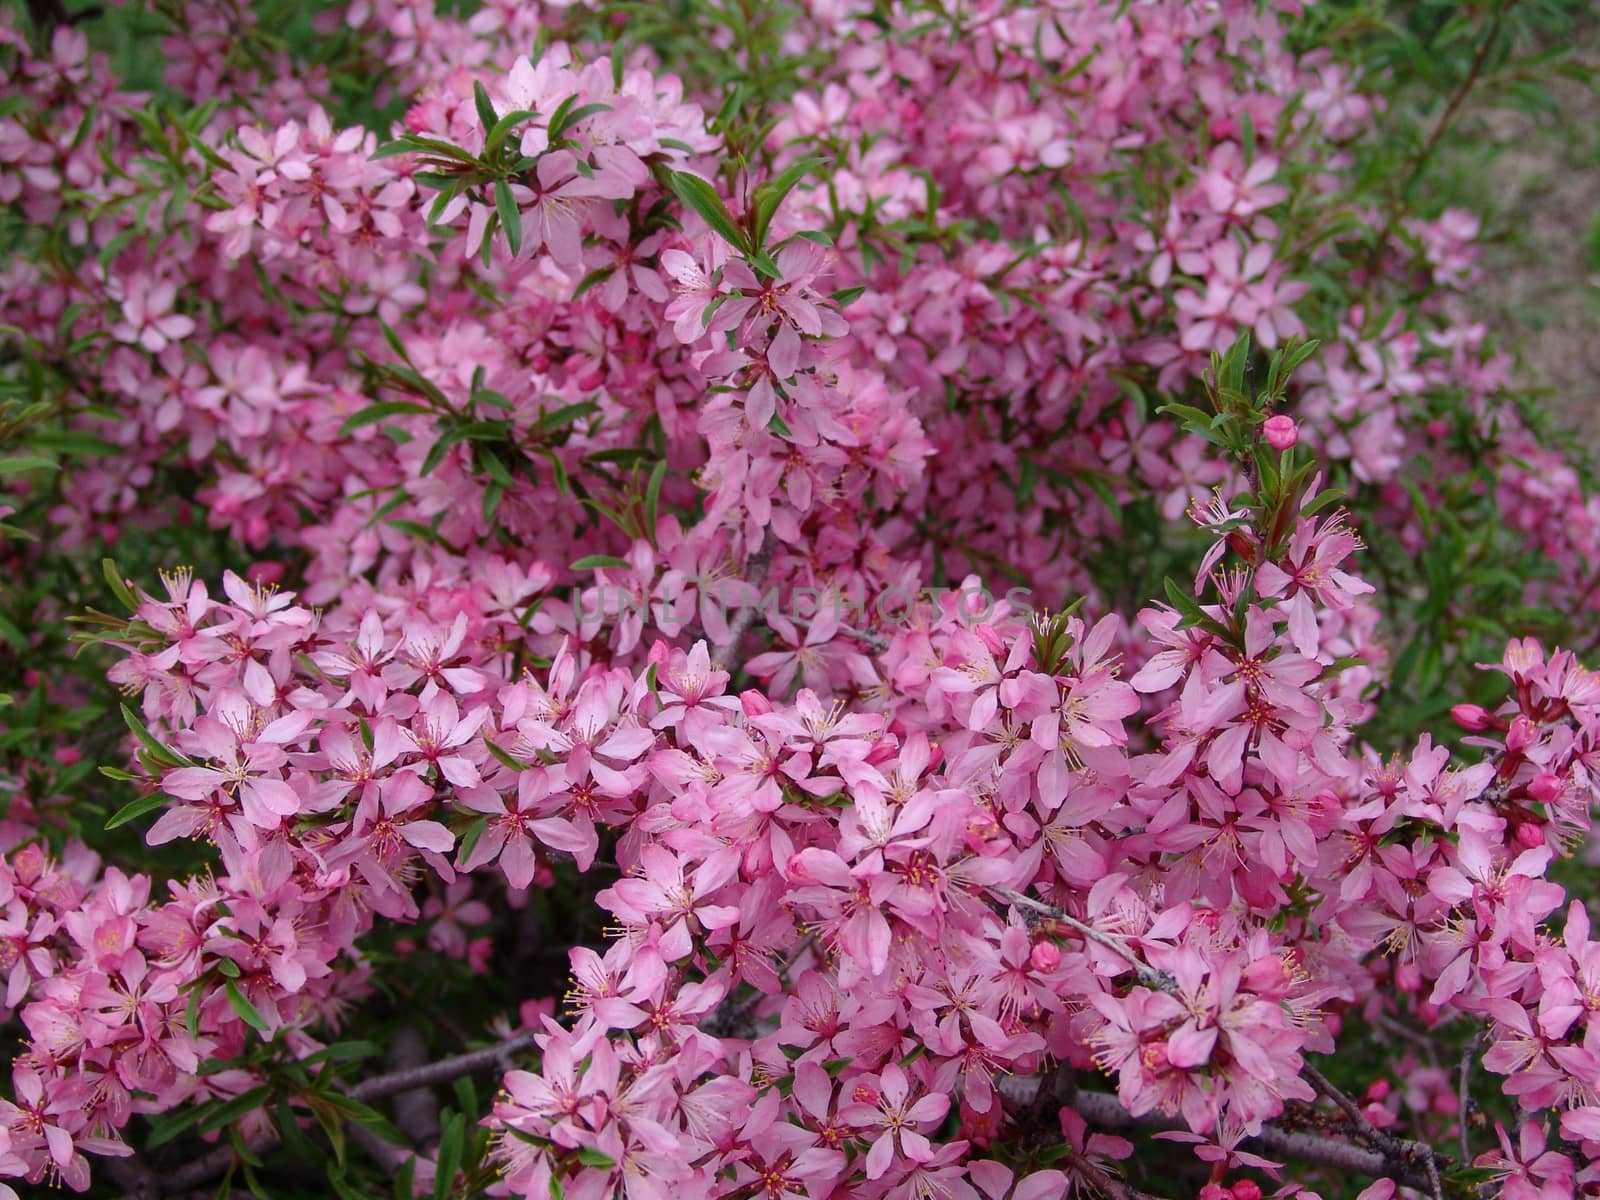 Bush with pink flowers